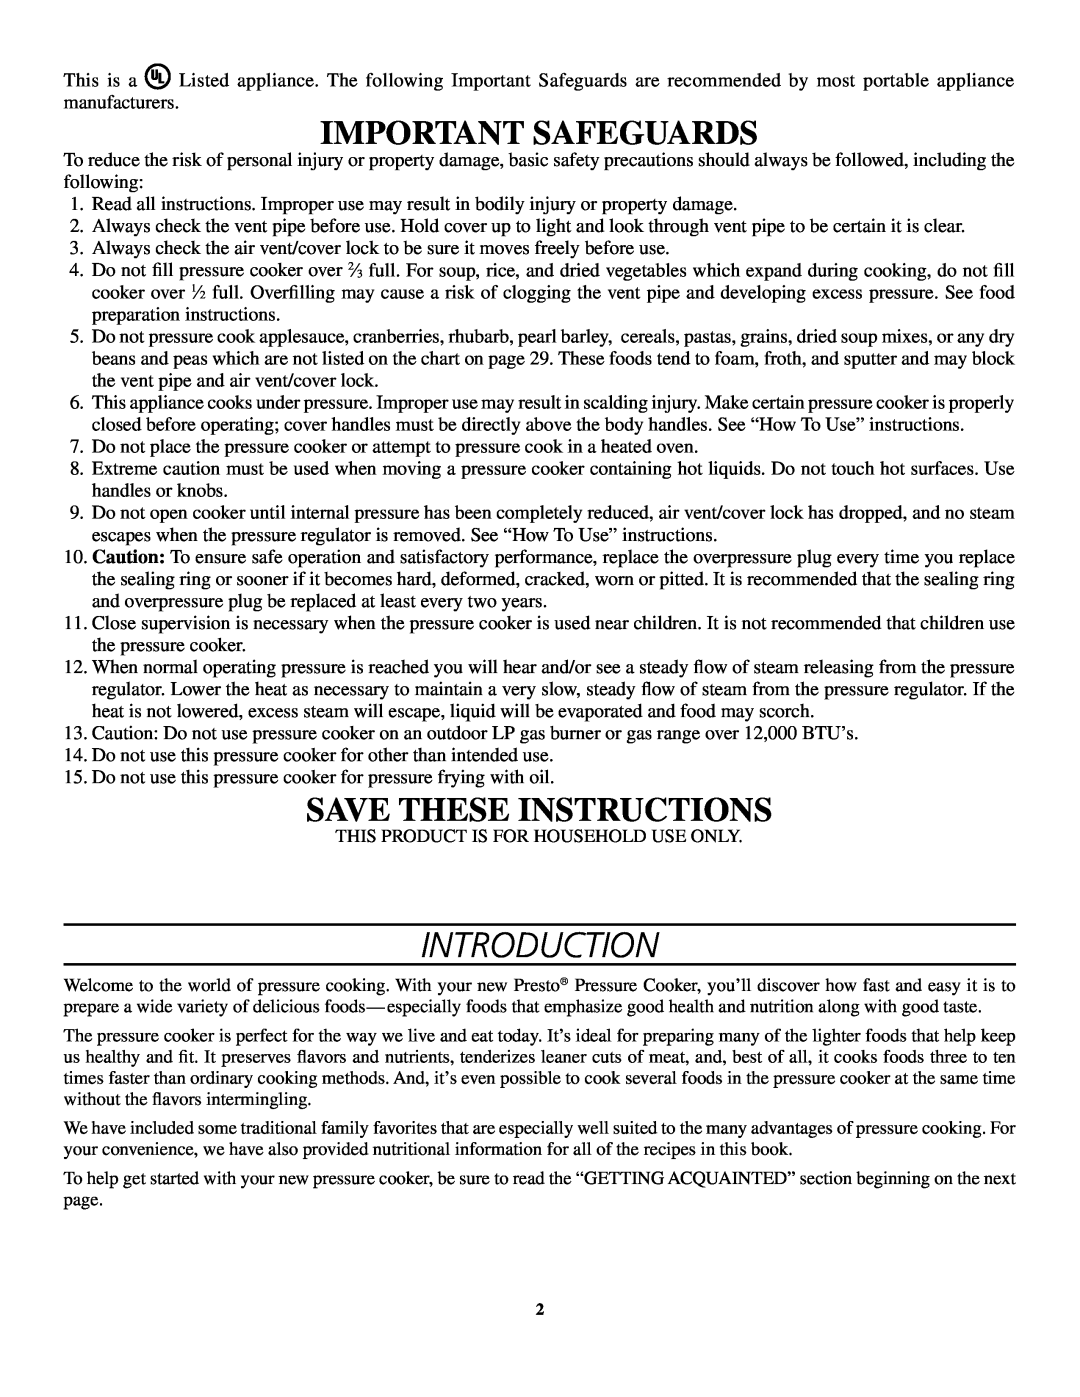 Presto 8-Quart Stainless Steel Pressure Cooker and Canner Introduction, Important Safeguards, Save These Instructions 